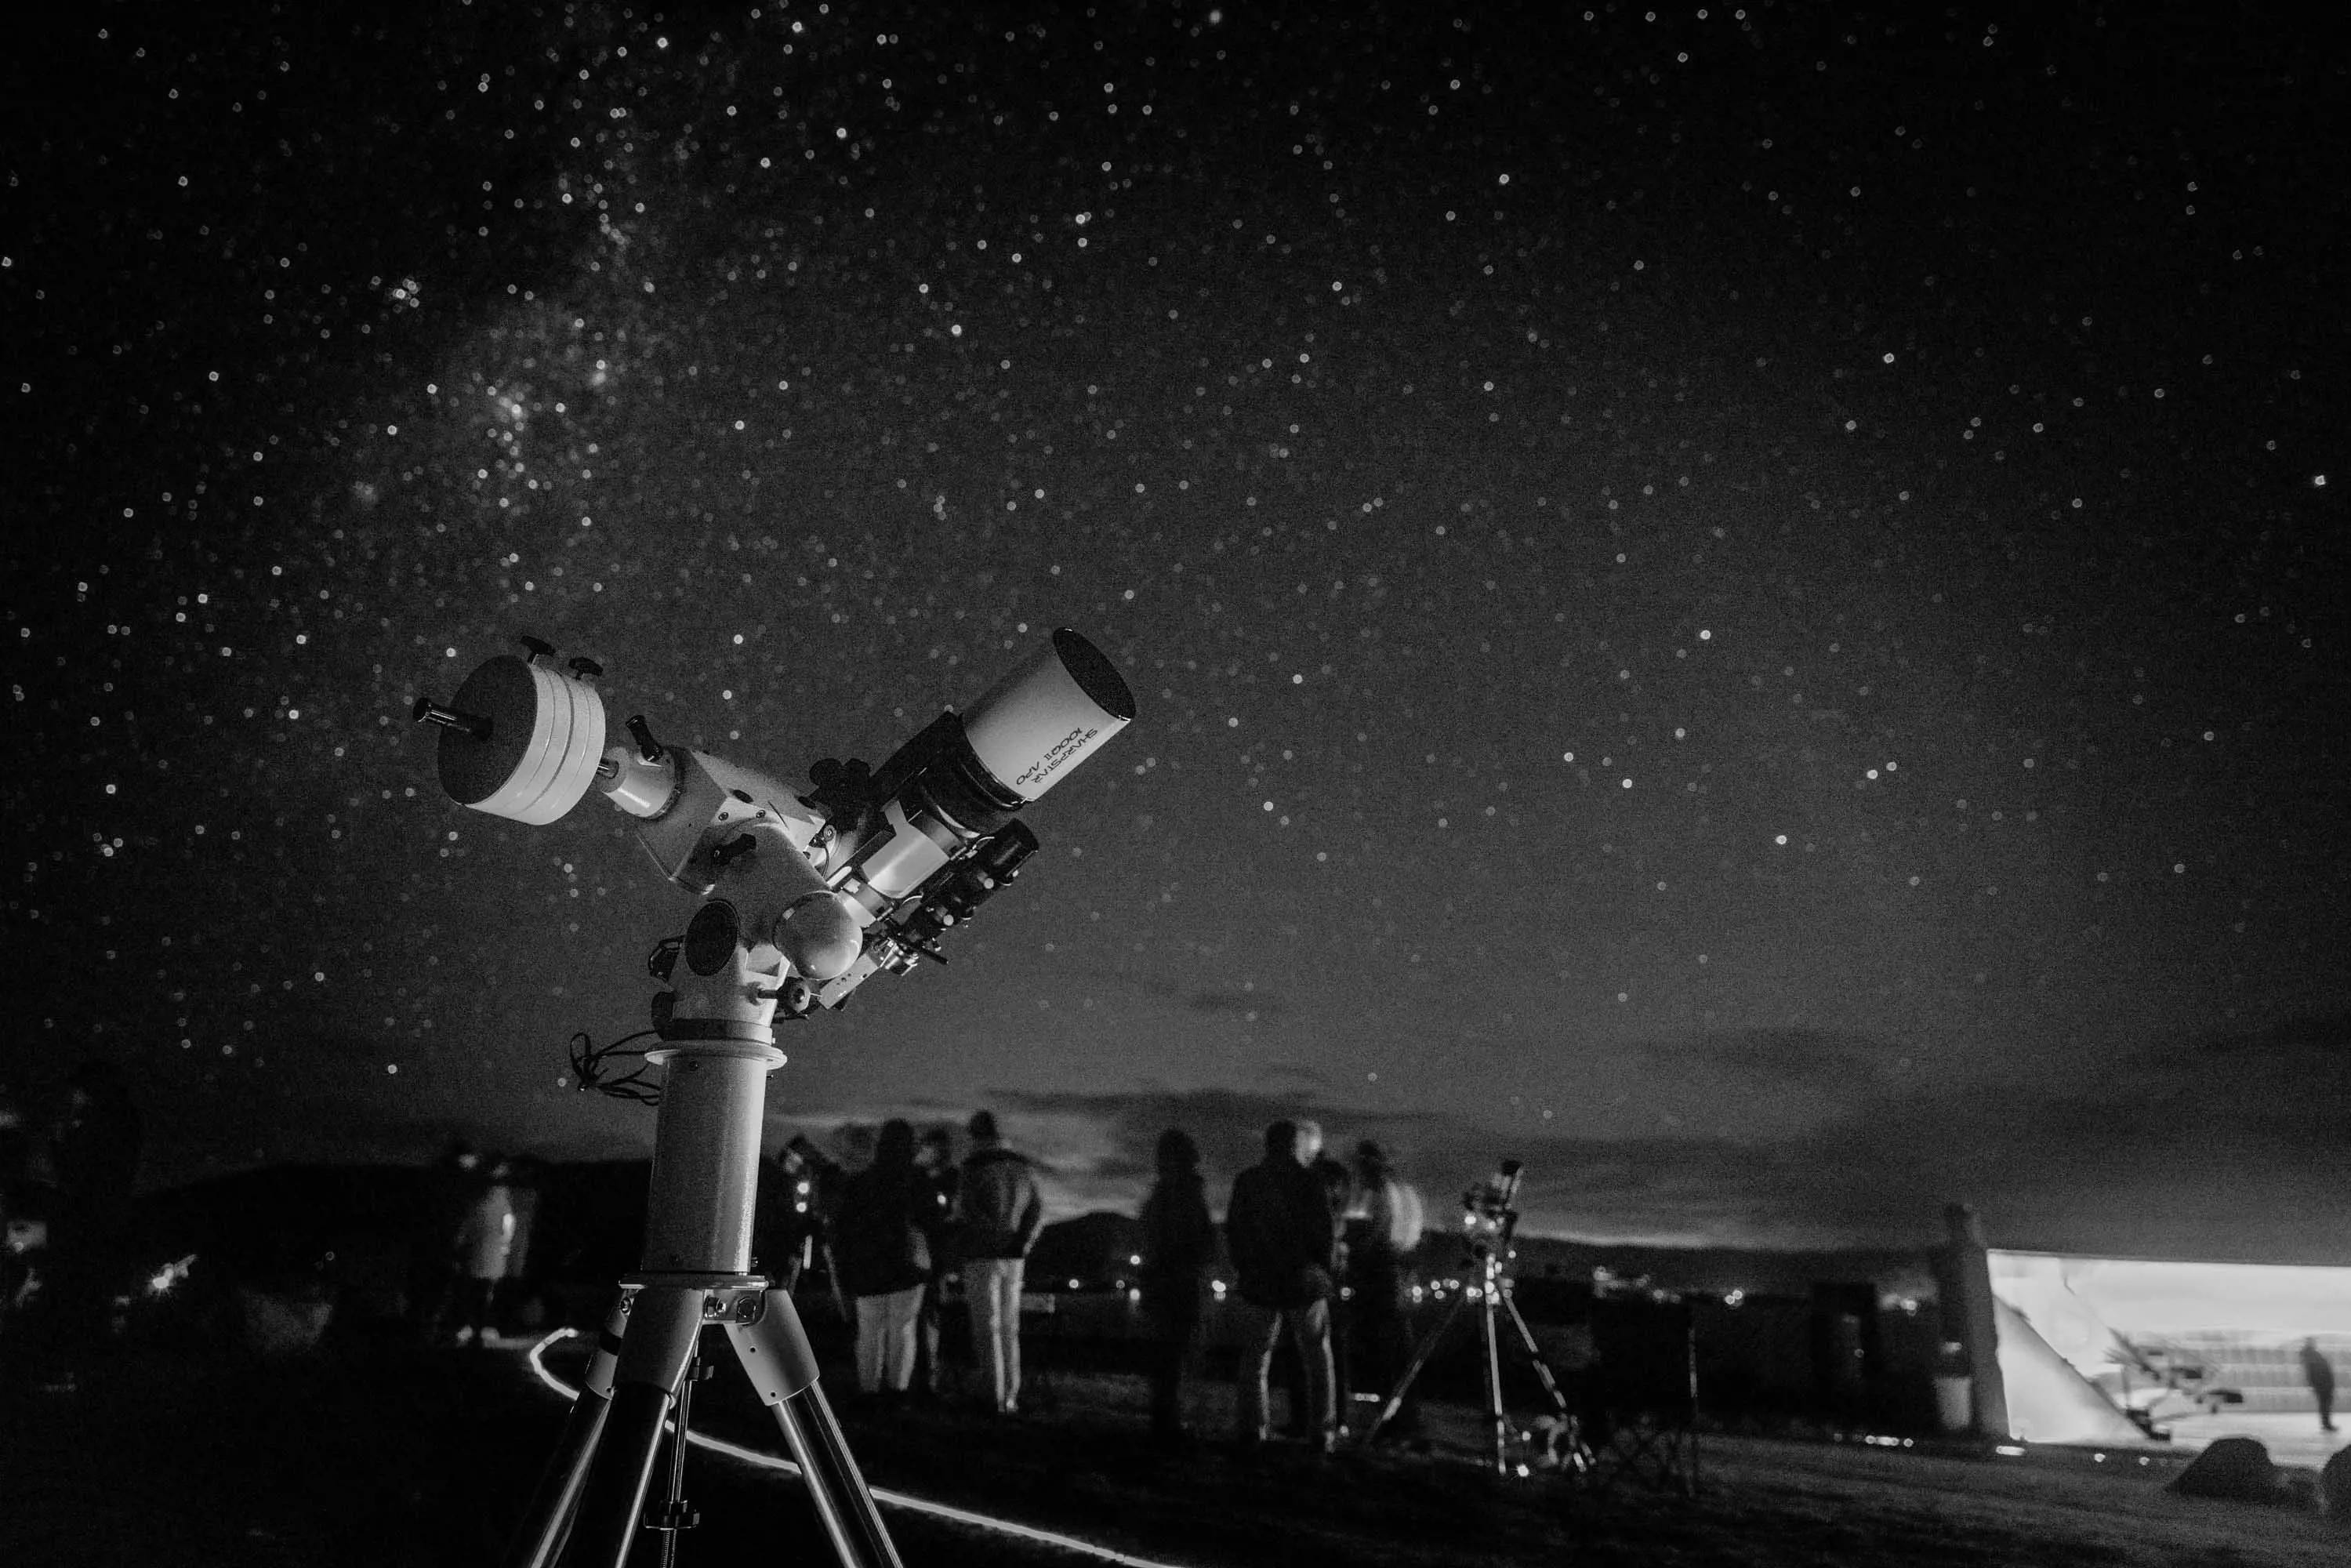 A large telescope stands in the foreground, while people stand in a group, gazing at the clear night sky filled with stars.